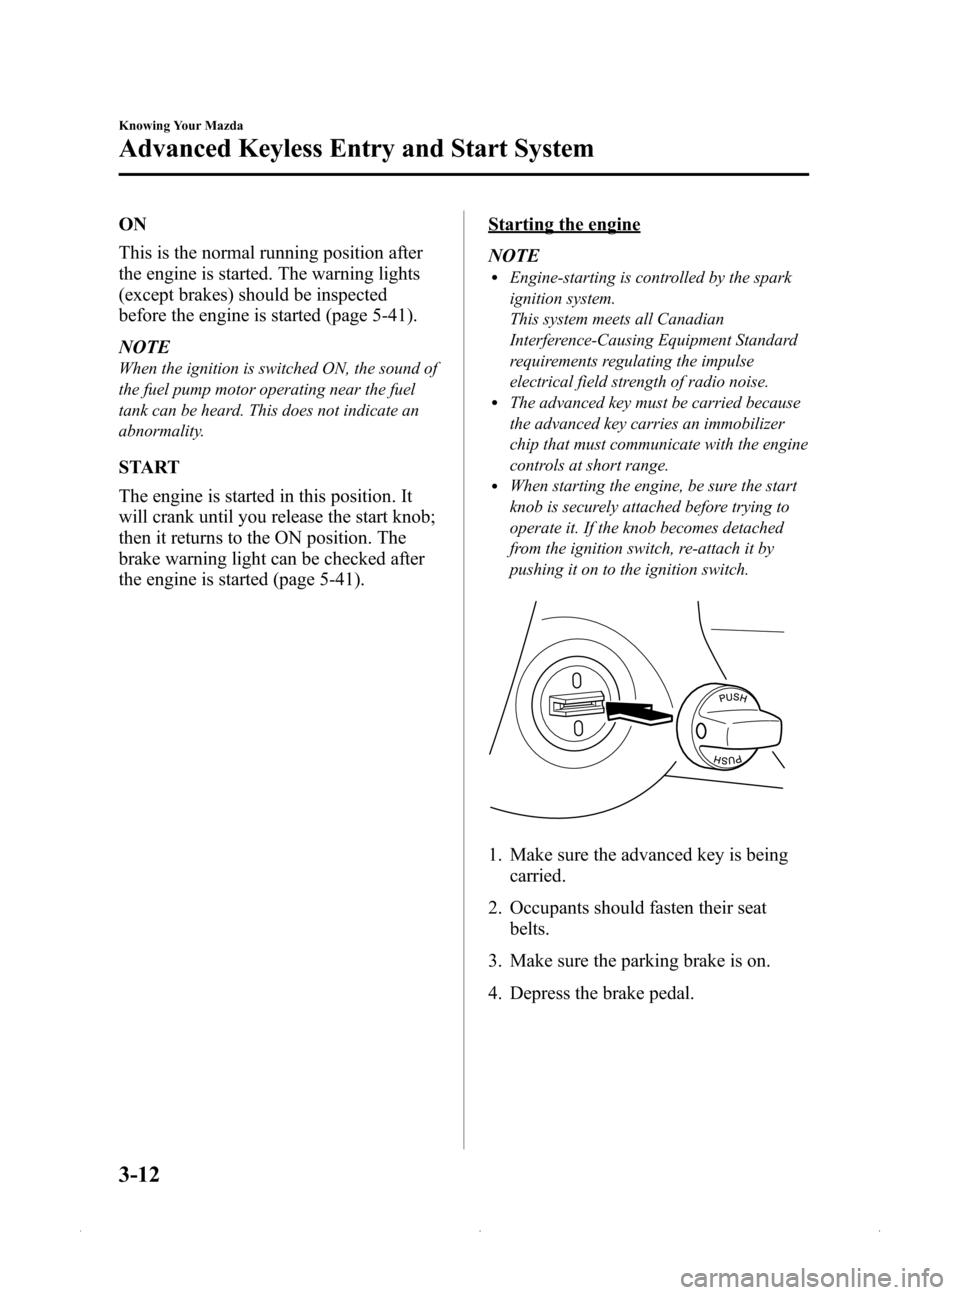 MAZDA MODEL MX-5 2015  Owners Manual (in English) Black plate (66,1)
ON
This is the normal running position after
the engine is started. The warning lights
(except brakes) should be inspected
before the engine is started (page 5-41).
NOTE
When the ig